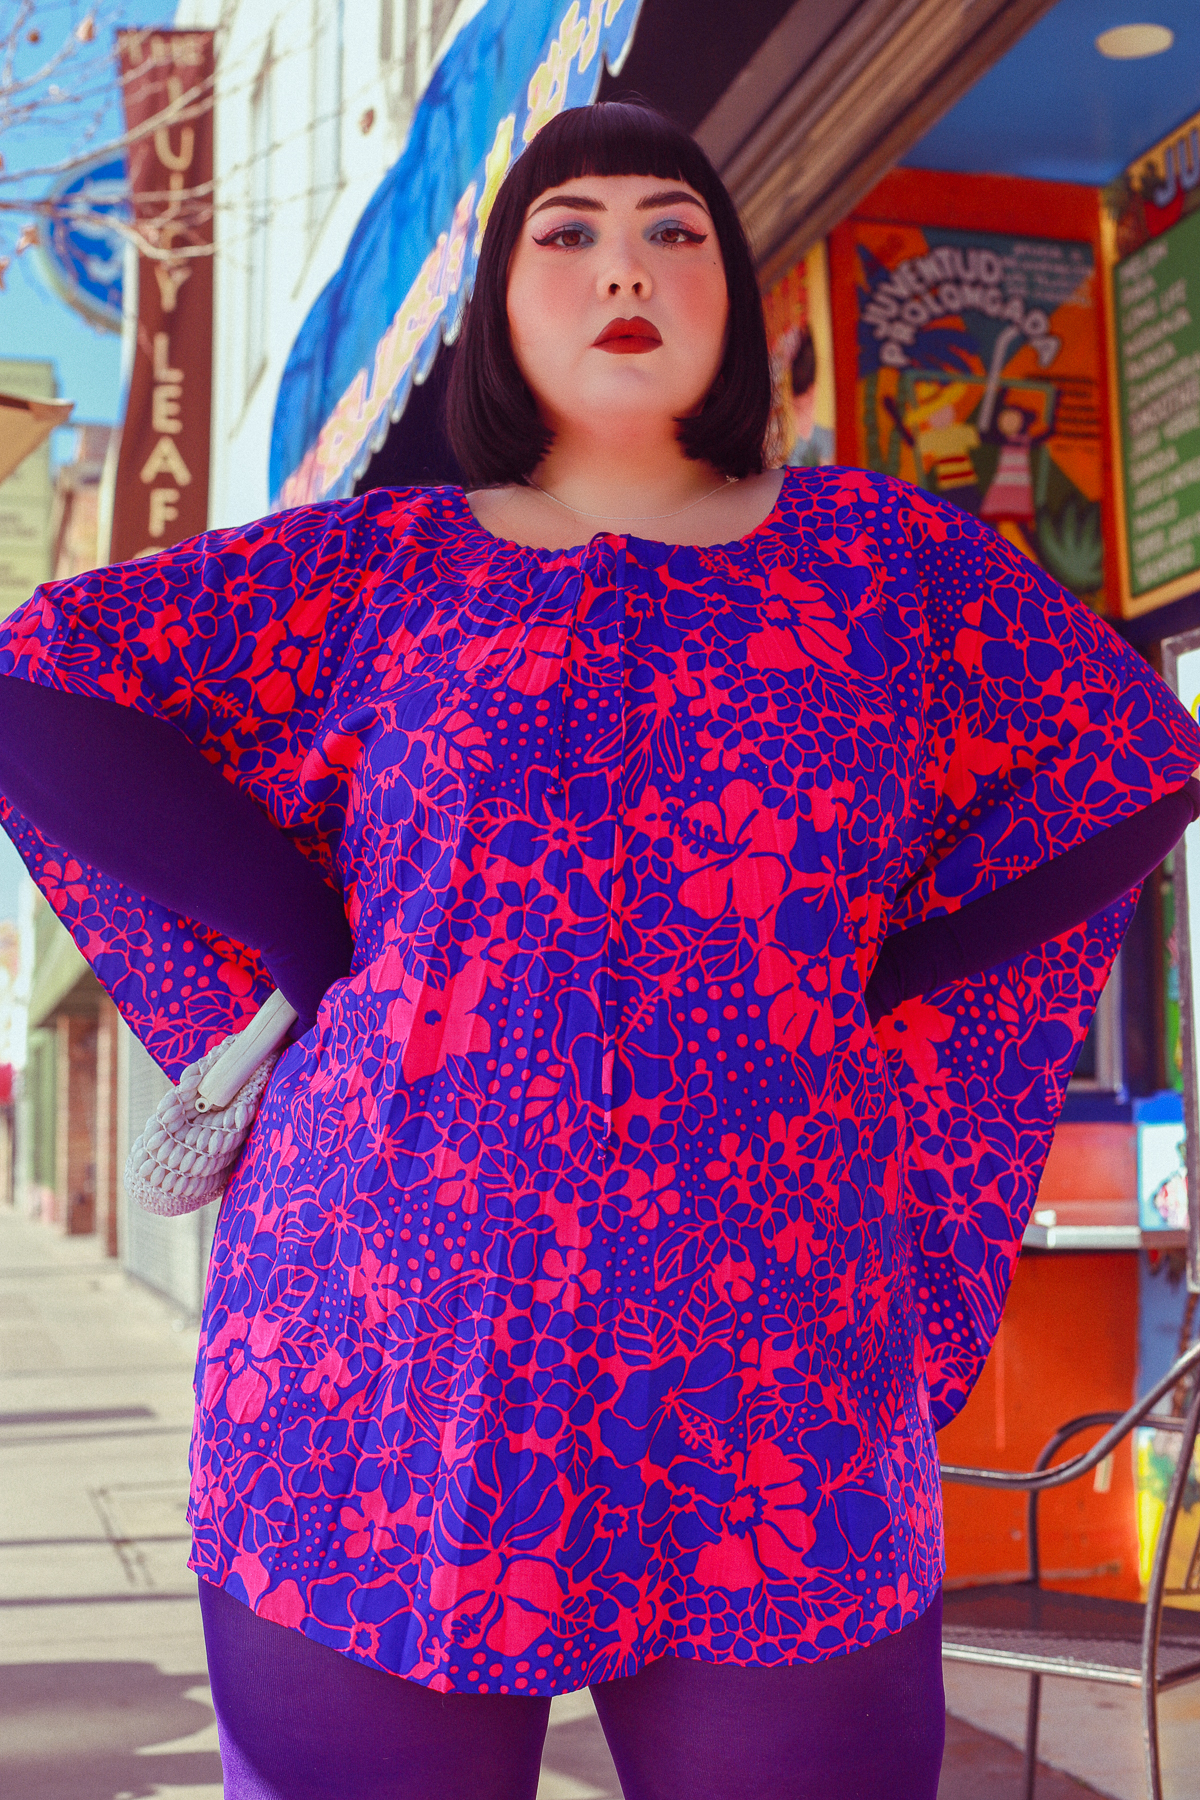 PLUS SIZE CLOTHING TRENDS - EXAMPLES OF A STYLISH LOOK - VOVK BLOG